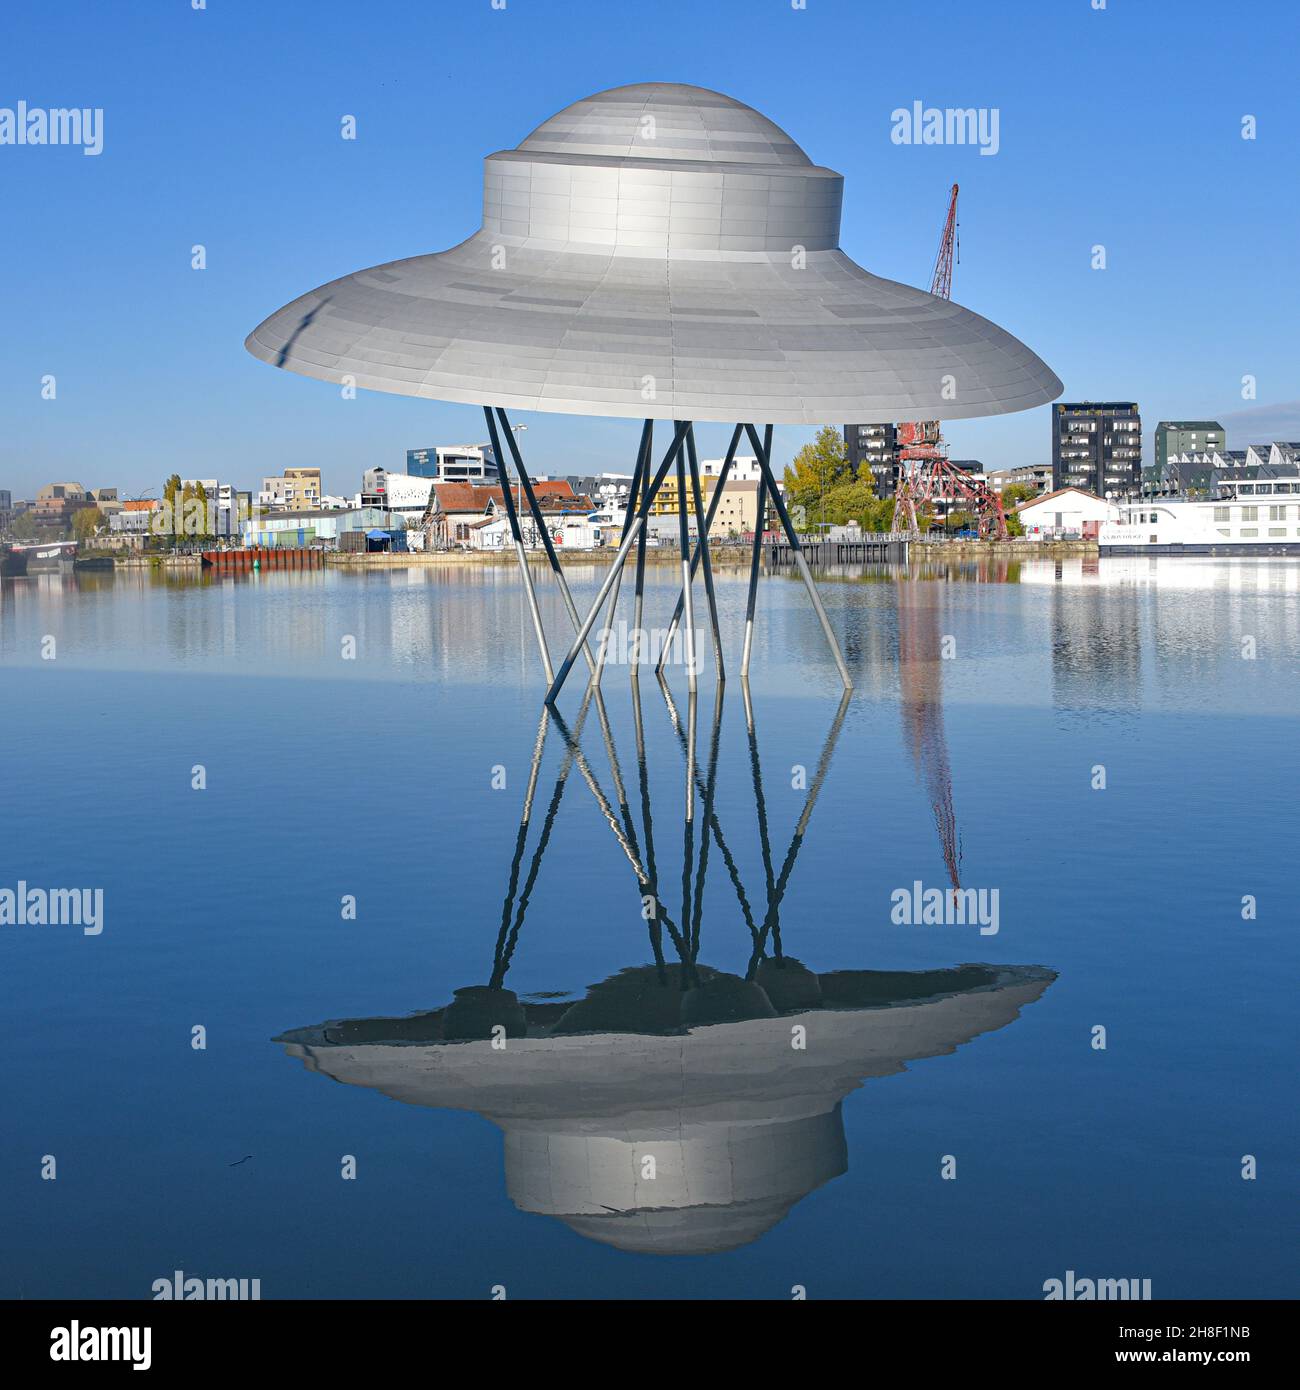 Bordeaux, France - 7 Nov, 2021: Flying Saucer Art Work by Suzanne Treister in the Bordeaux quayside Stock Photo